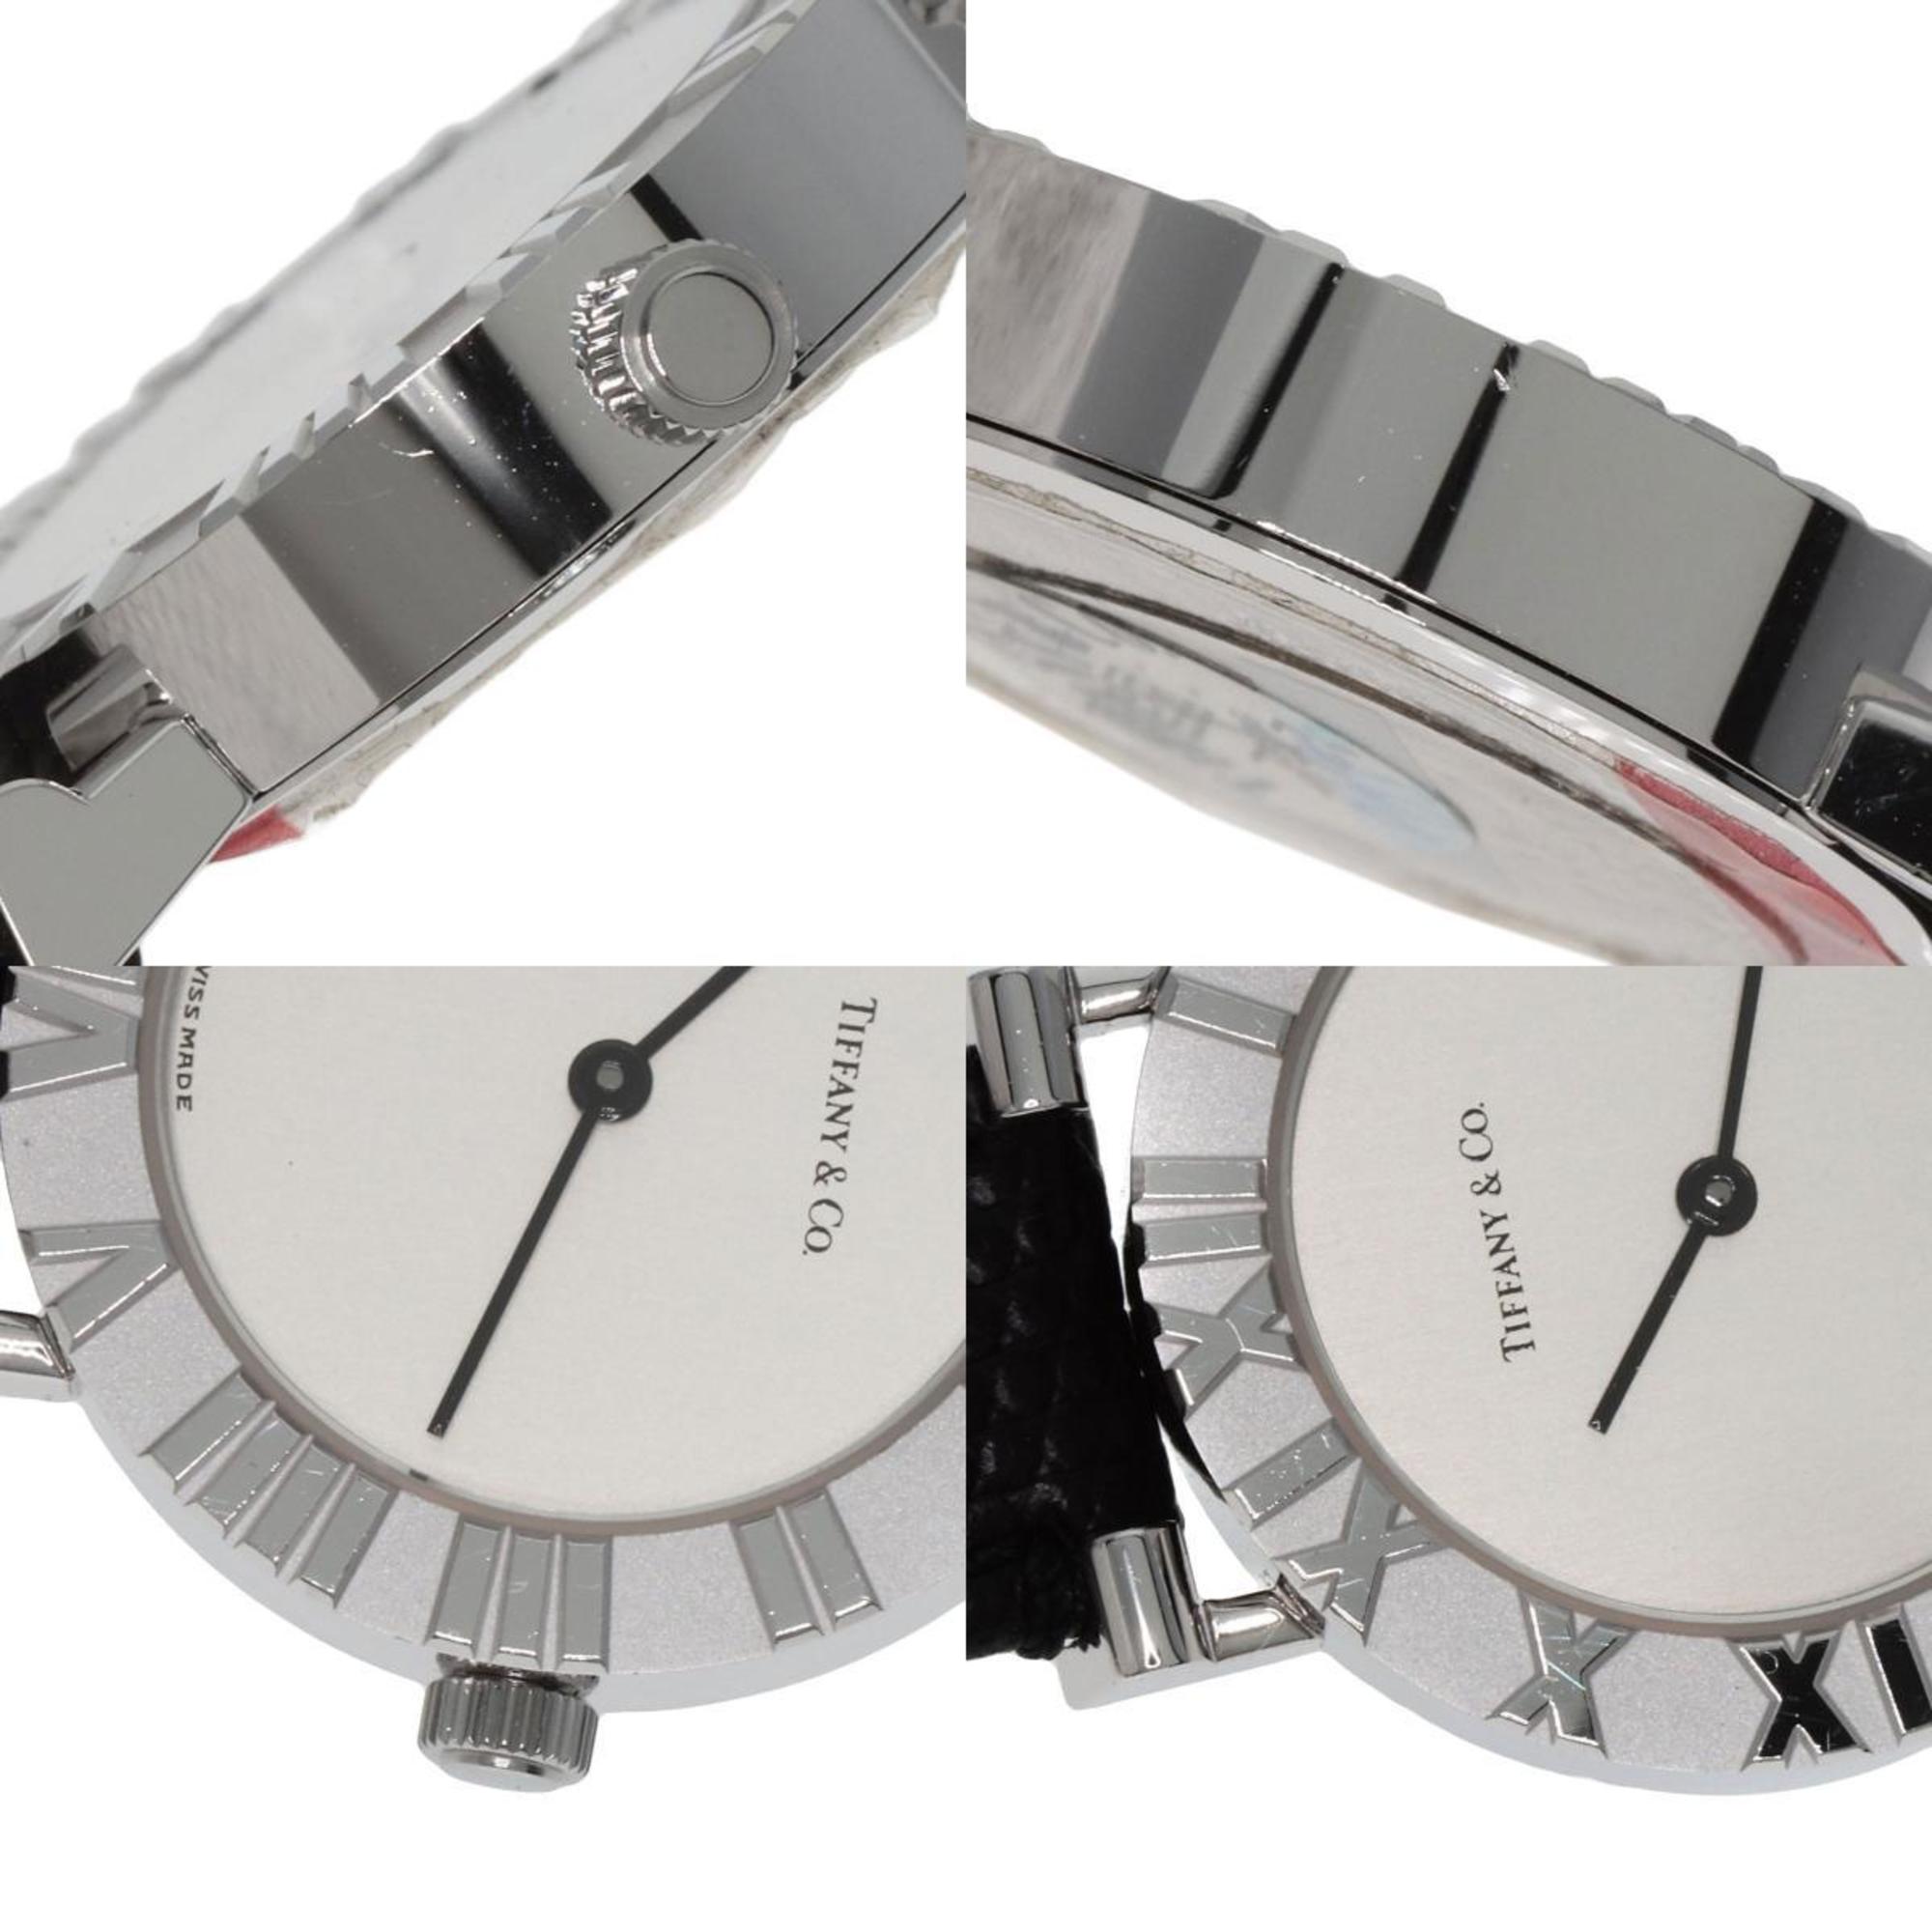 Tiffany & Co. L0640 Atlas Watch Stainless Steel/Leather Ladies TIFFANY